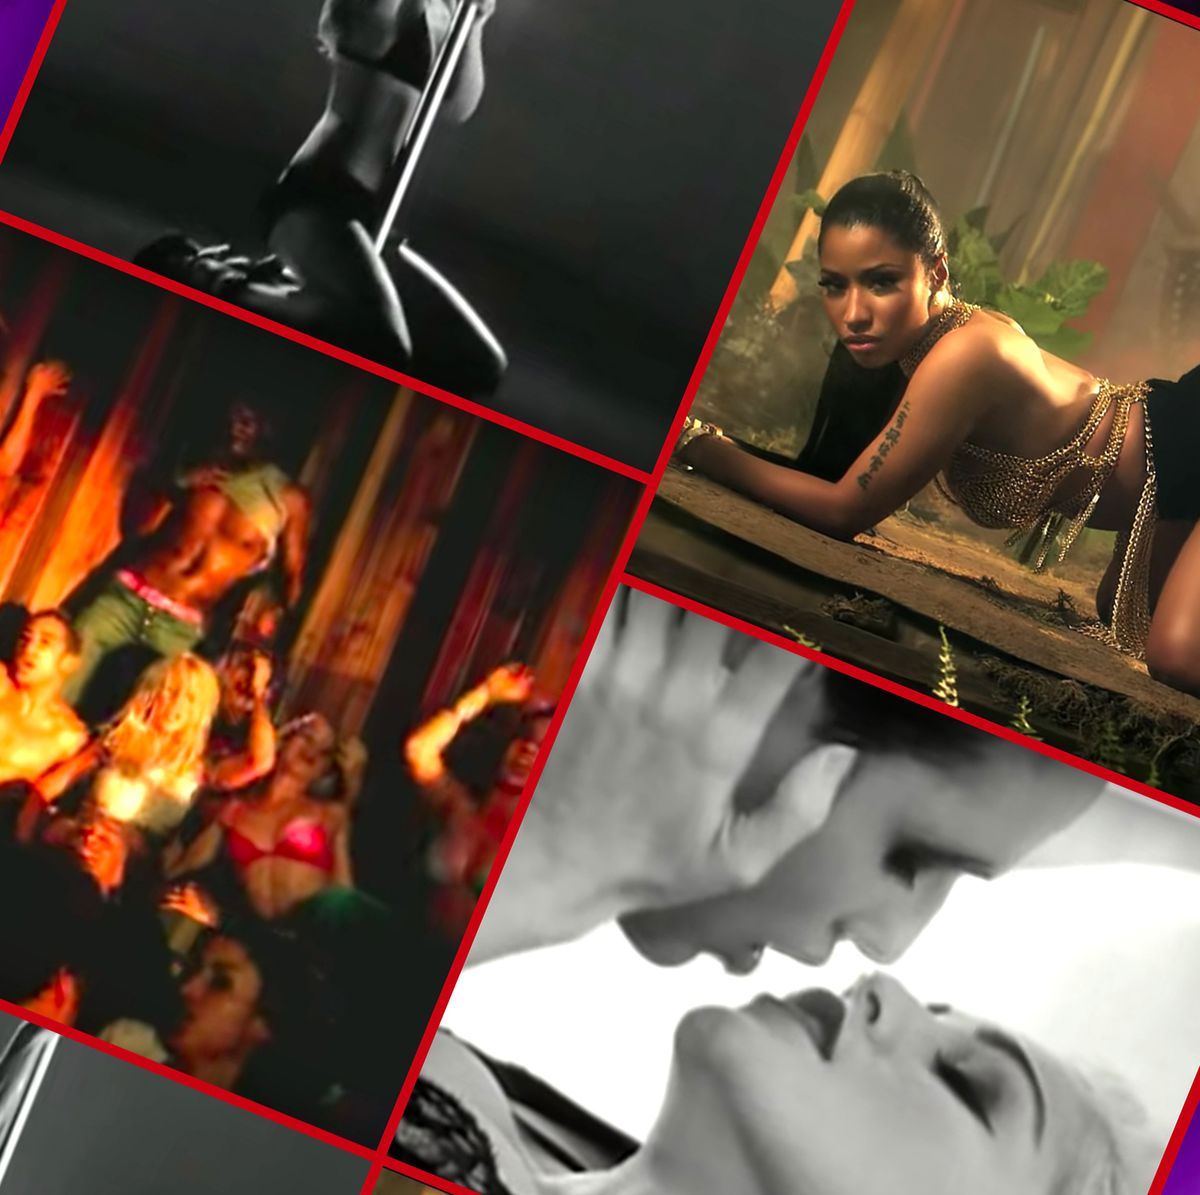 31 Sexiest Music Videos of All Time - Hottest Music Videos Ever Made